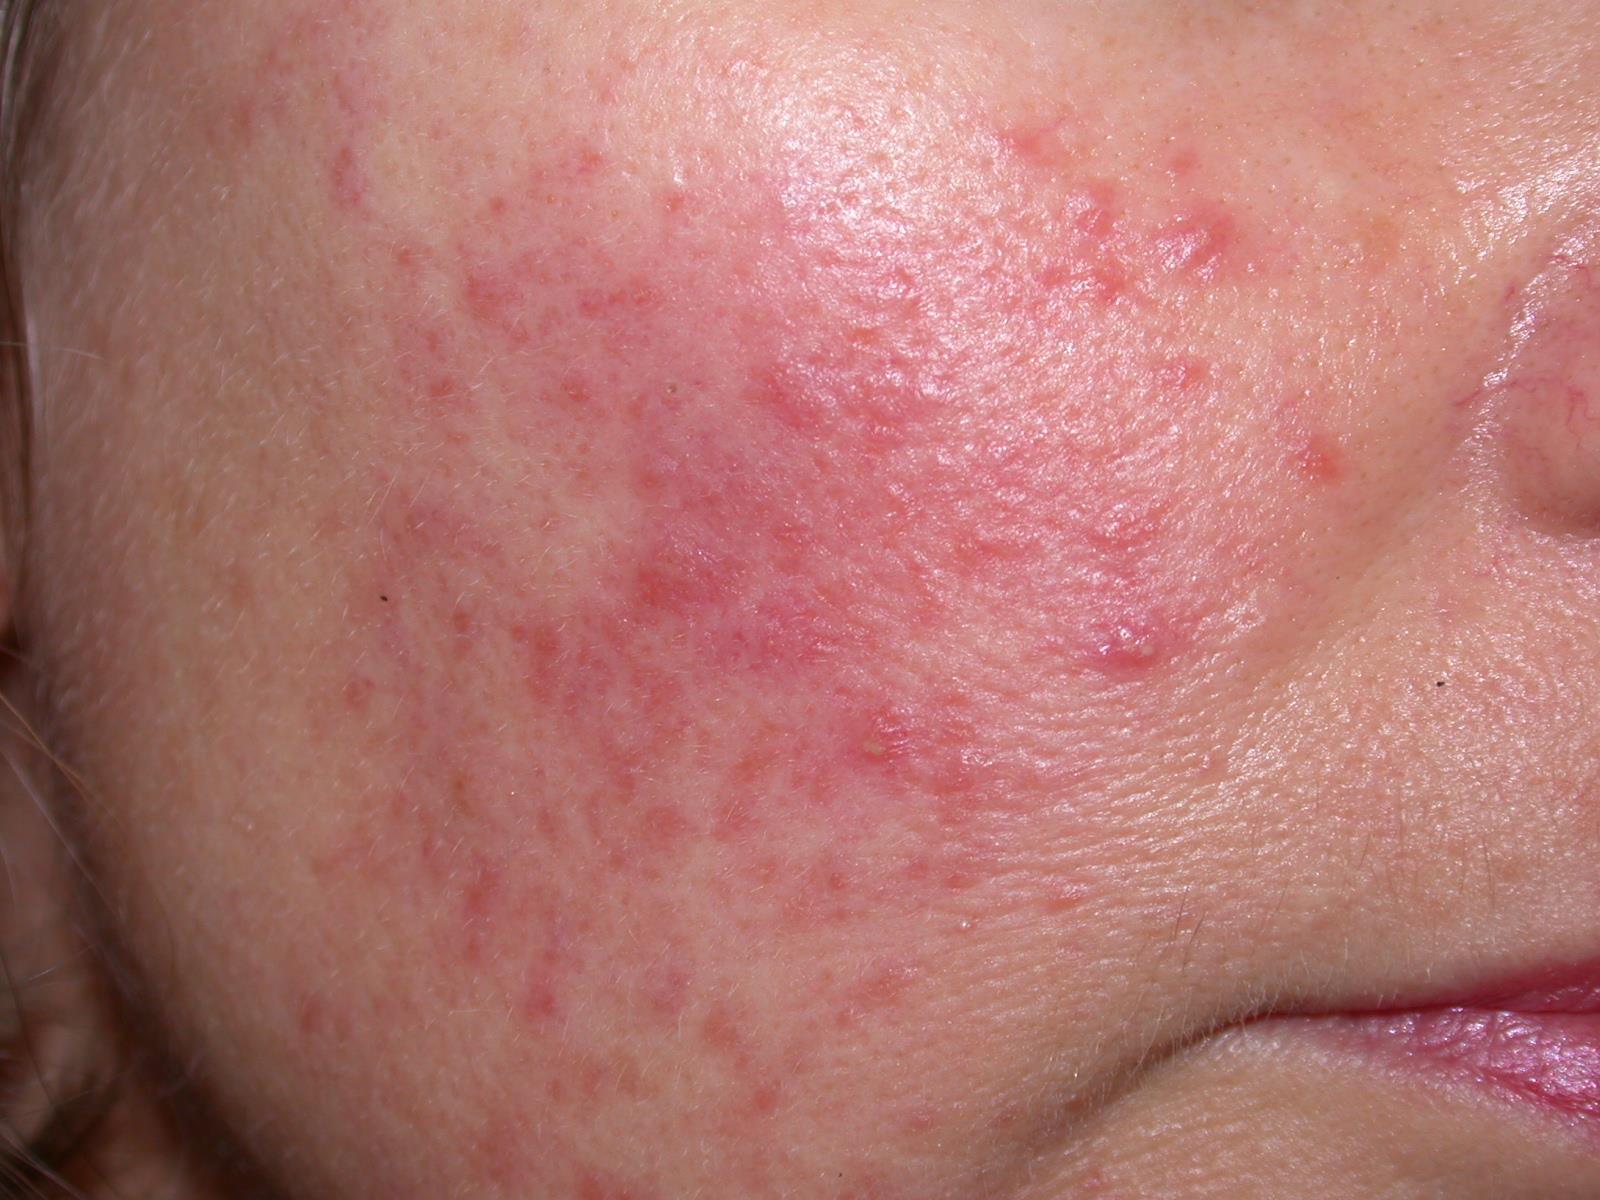 Recurrent blistering facial rashes